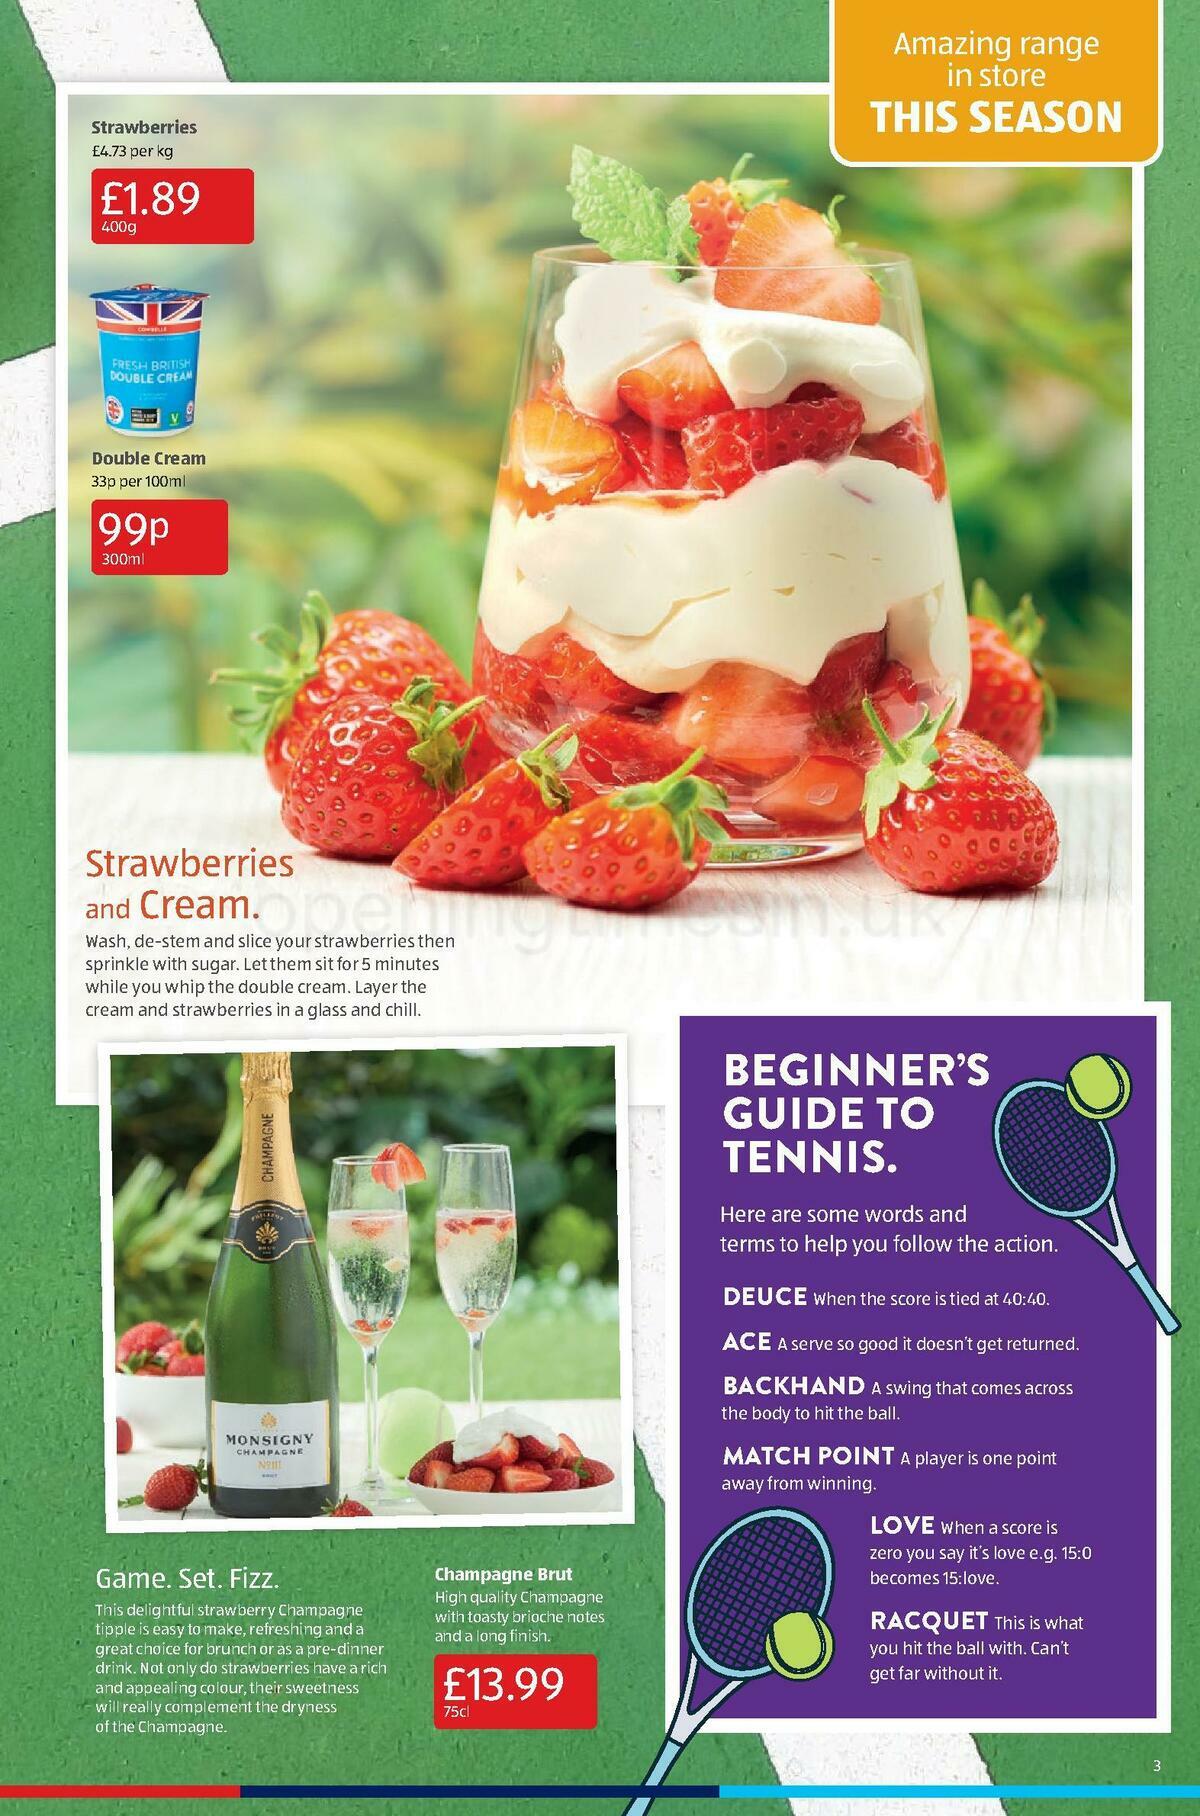 ALDI Offers from 3 July